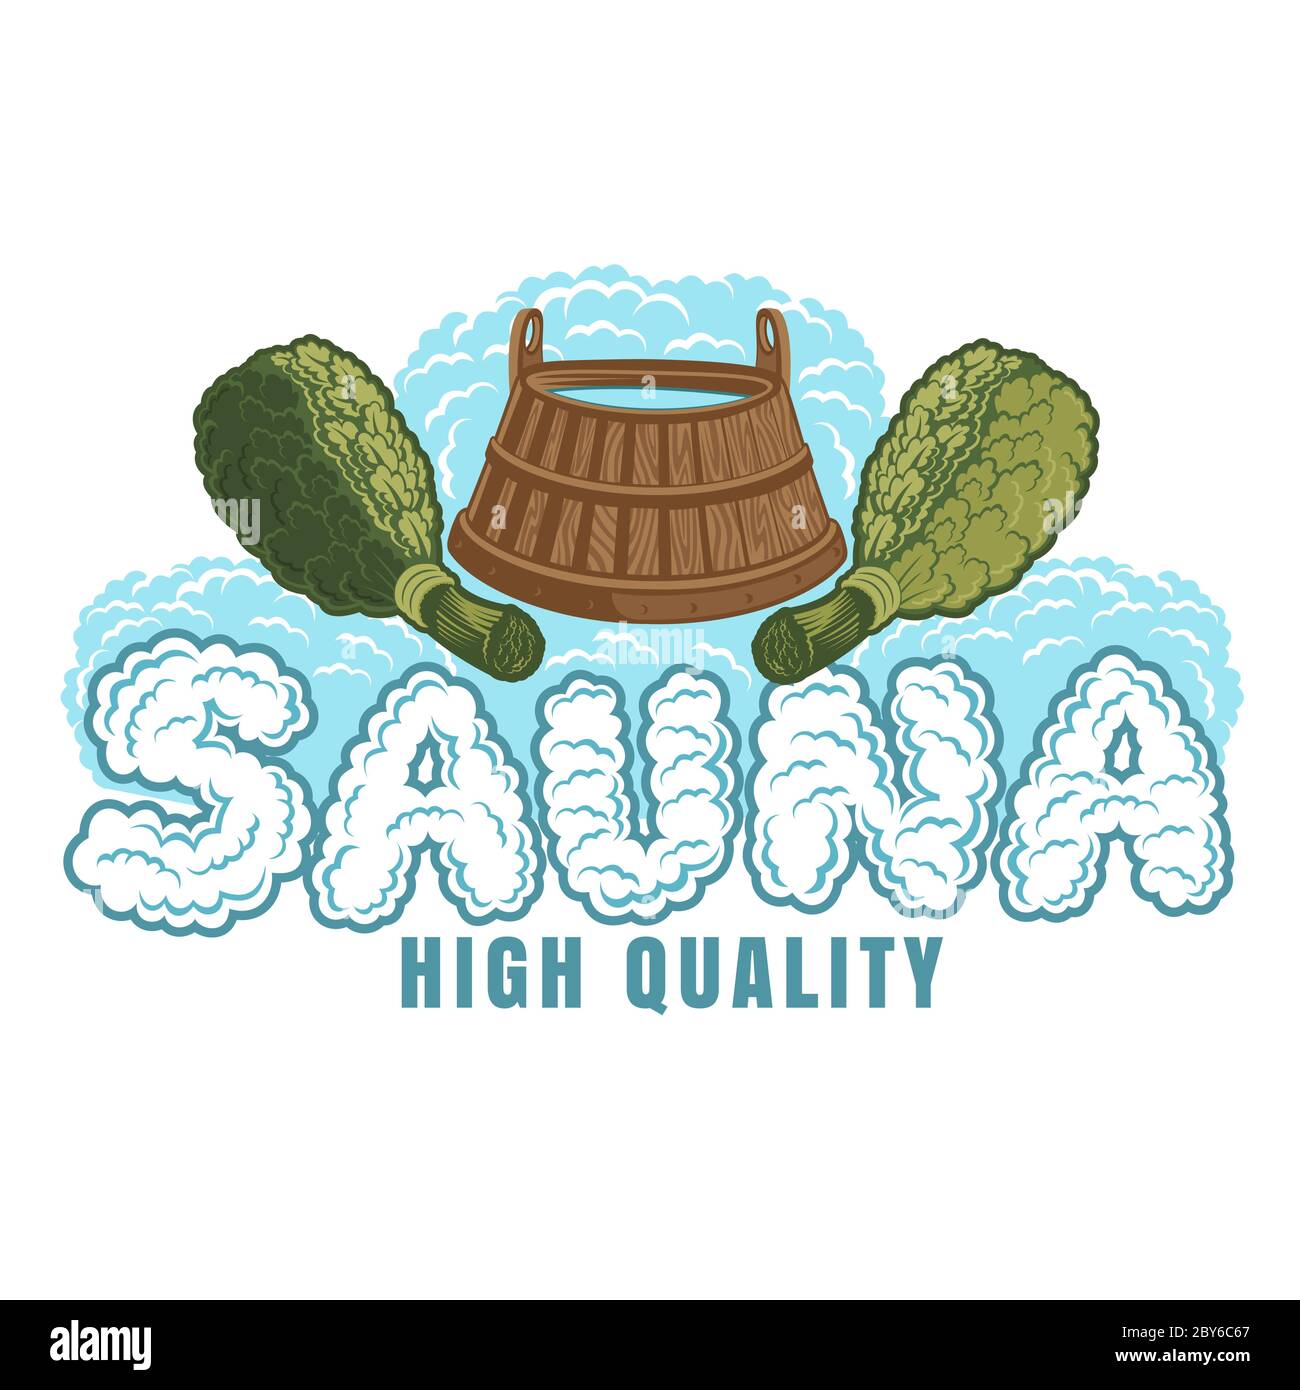 Label for sauna, banya or bathhouse. Sauna word from steam under wooden tub between oak besoms. Color vector illustration Stock Vector